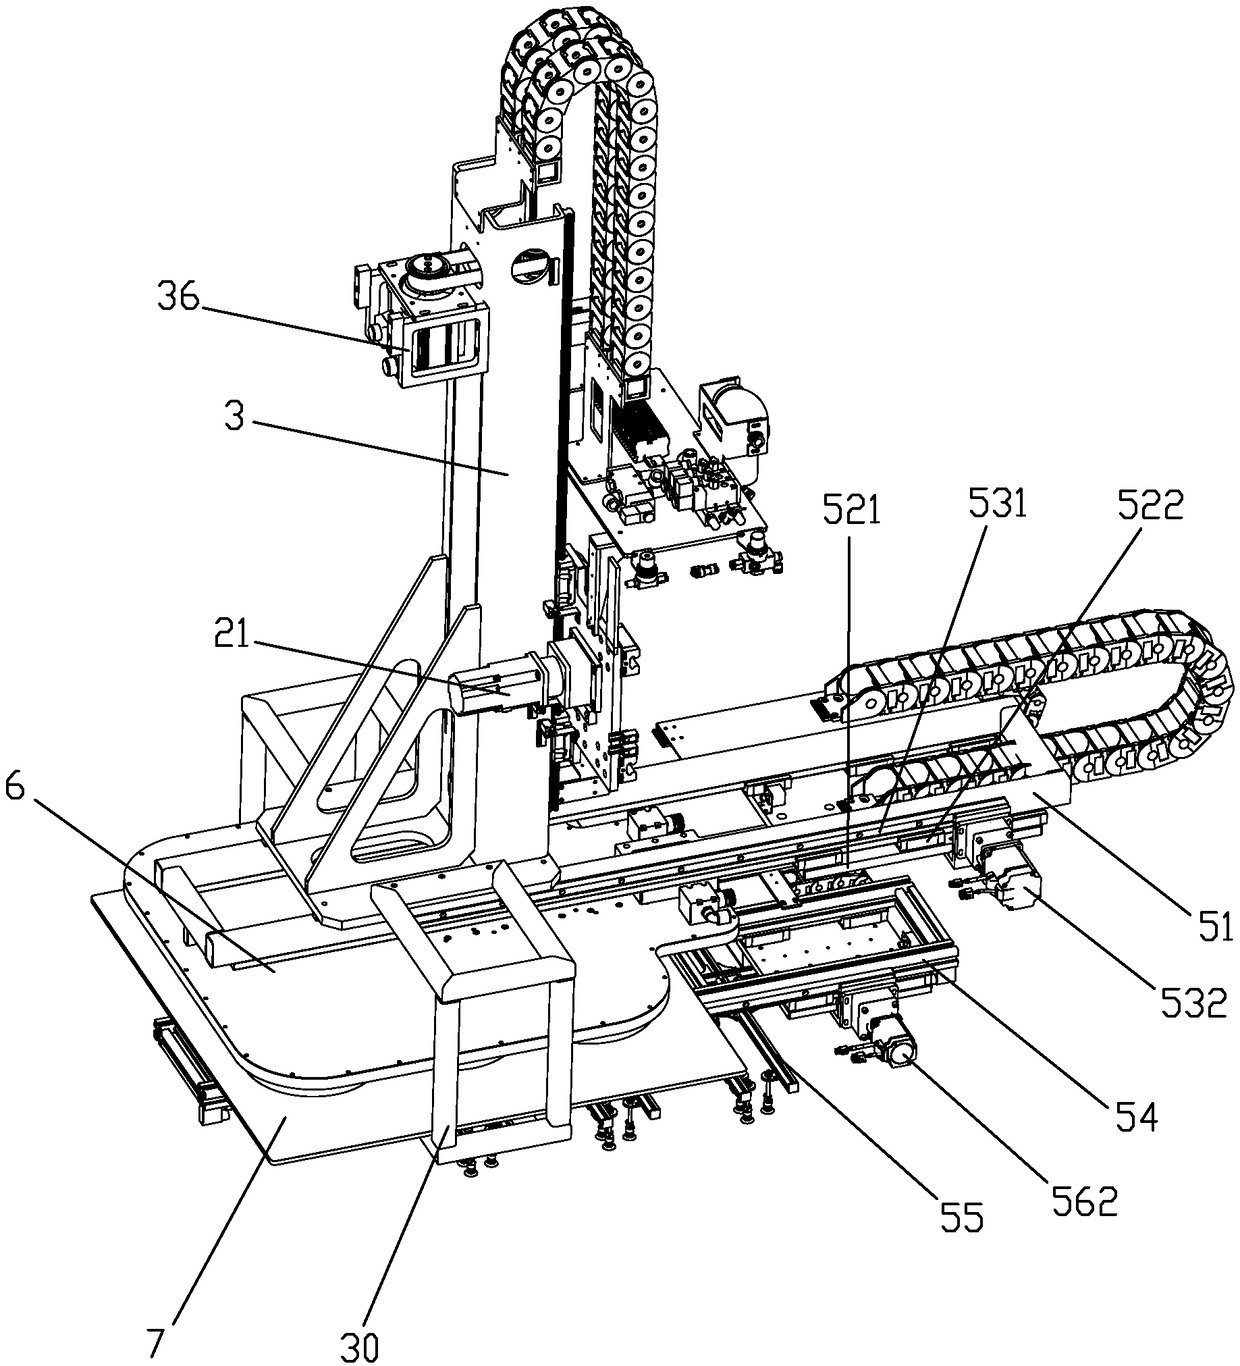 Paper matrix loading and unloading material manipulator with stable pick-and-place part mechanism